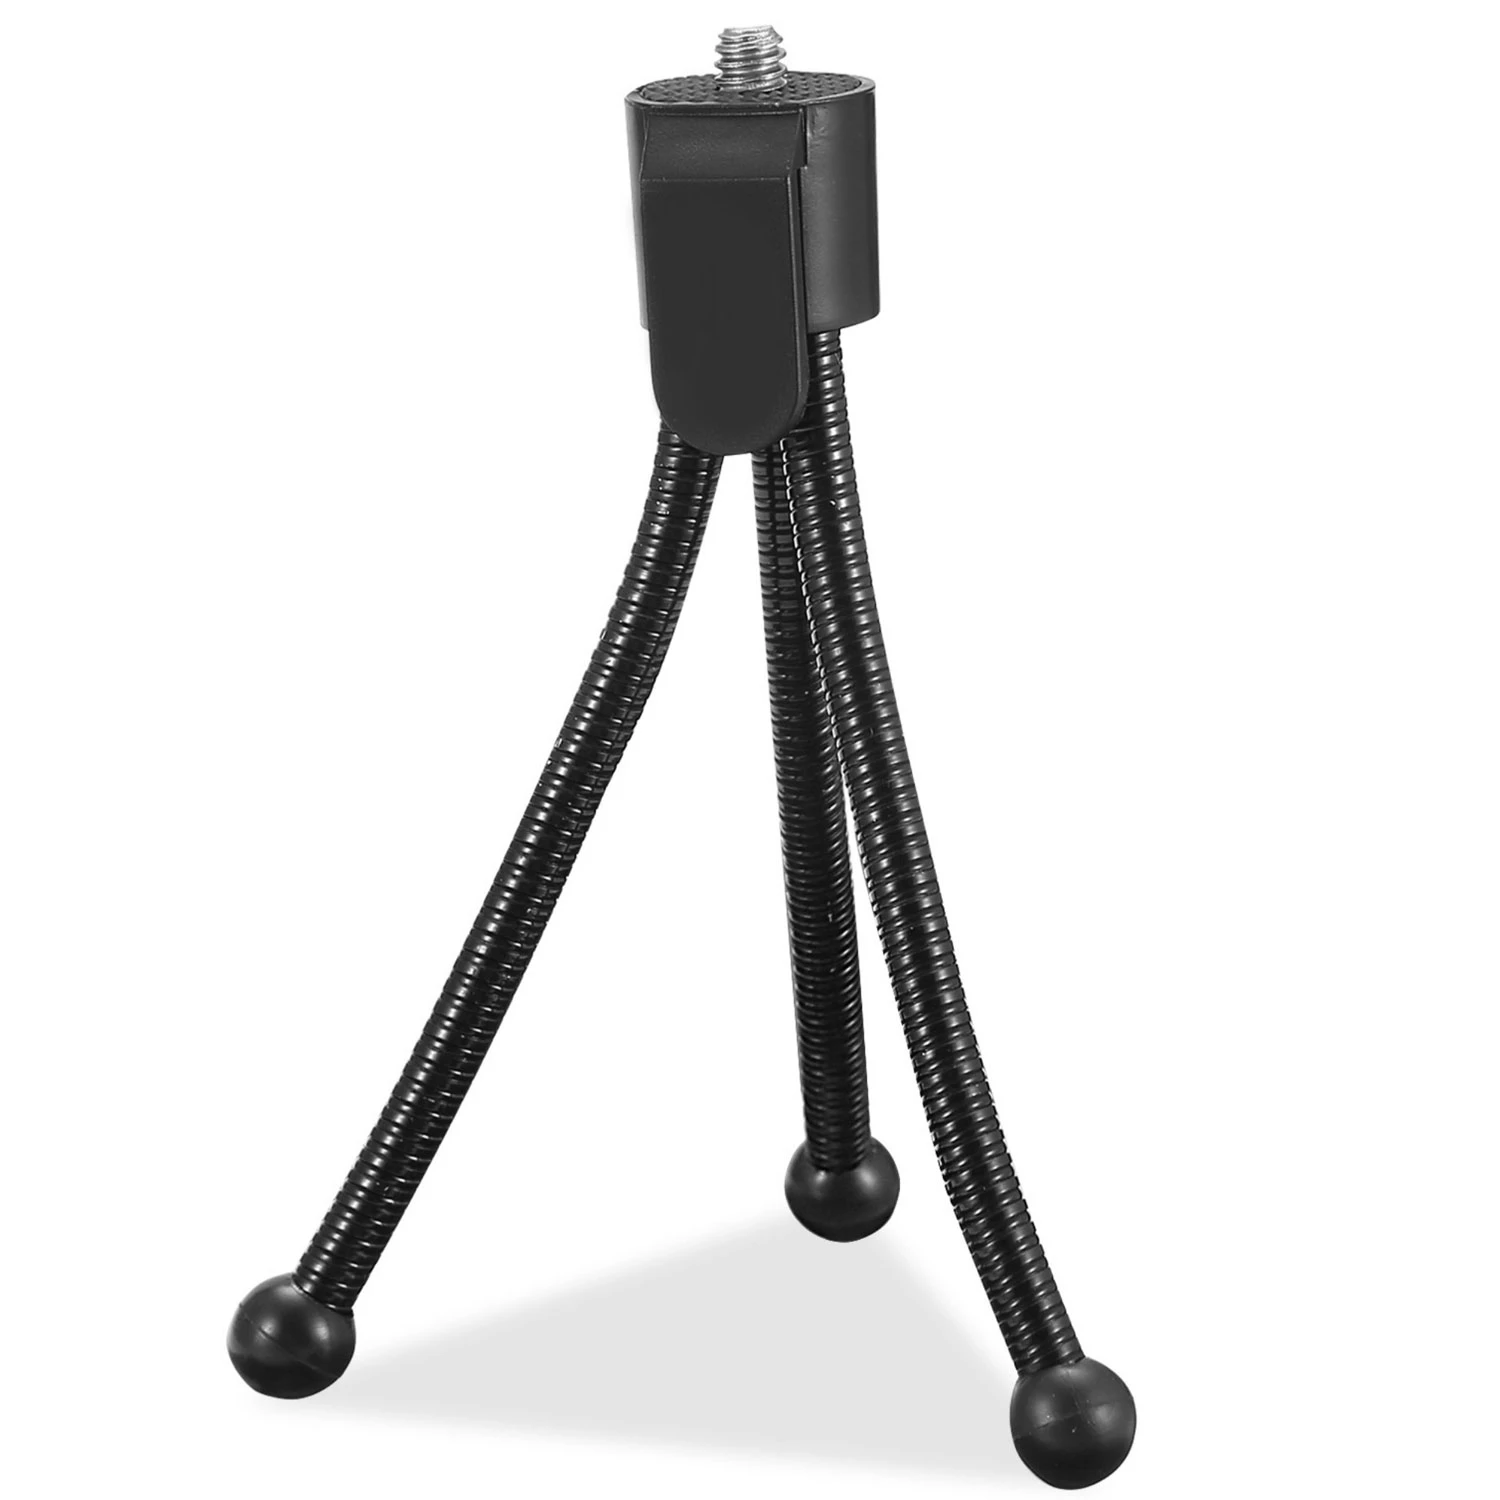 Flexible Tripod Stand for Camera & Mini Projector - Heavy Duty Tabletop Mount with Anti-Slip Feet